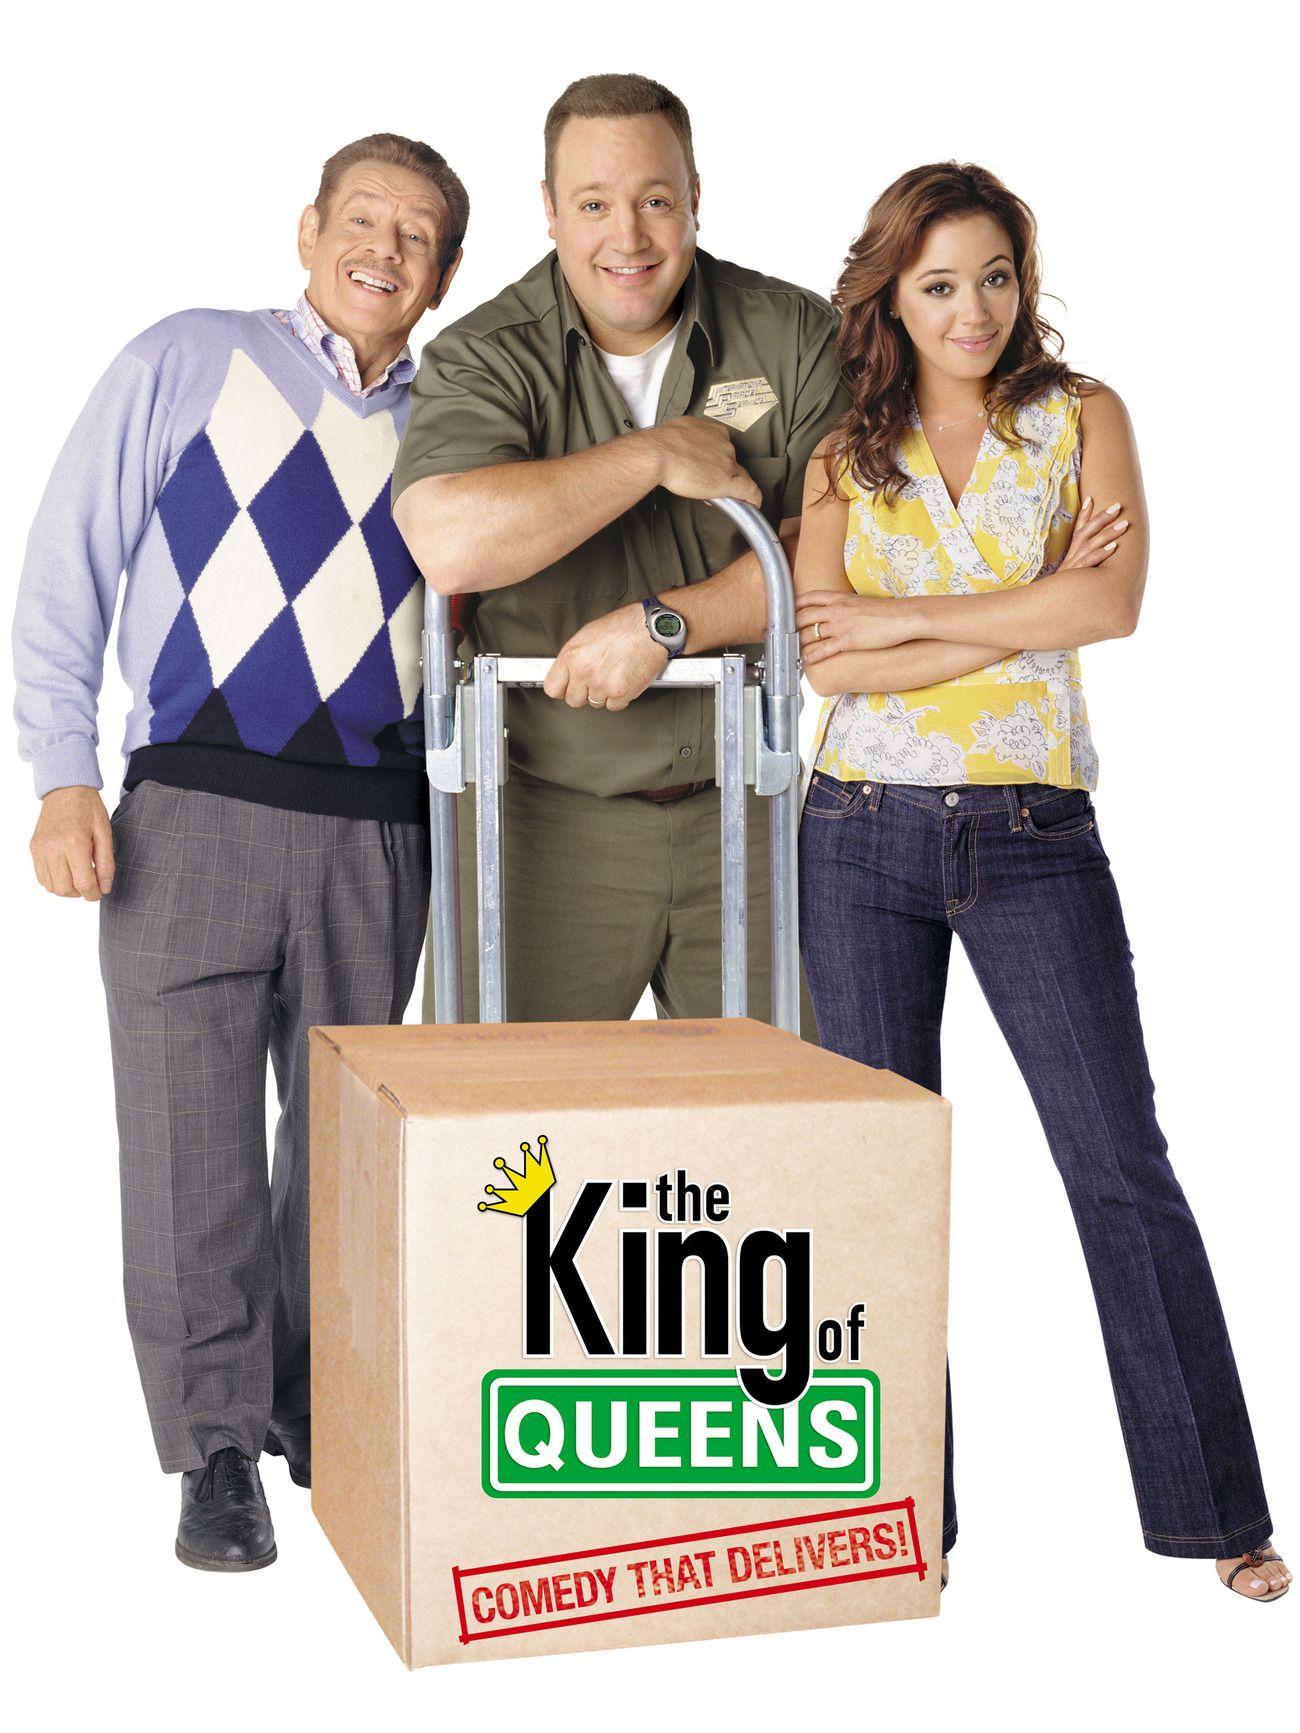 The King of Queens Logo - King Of Queens TV Show: News, Videos, Full Episodes and More | TV Guide